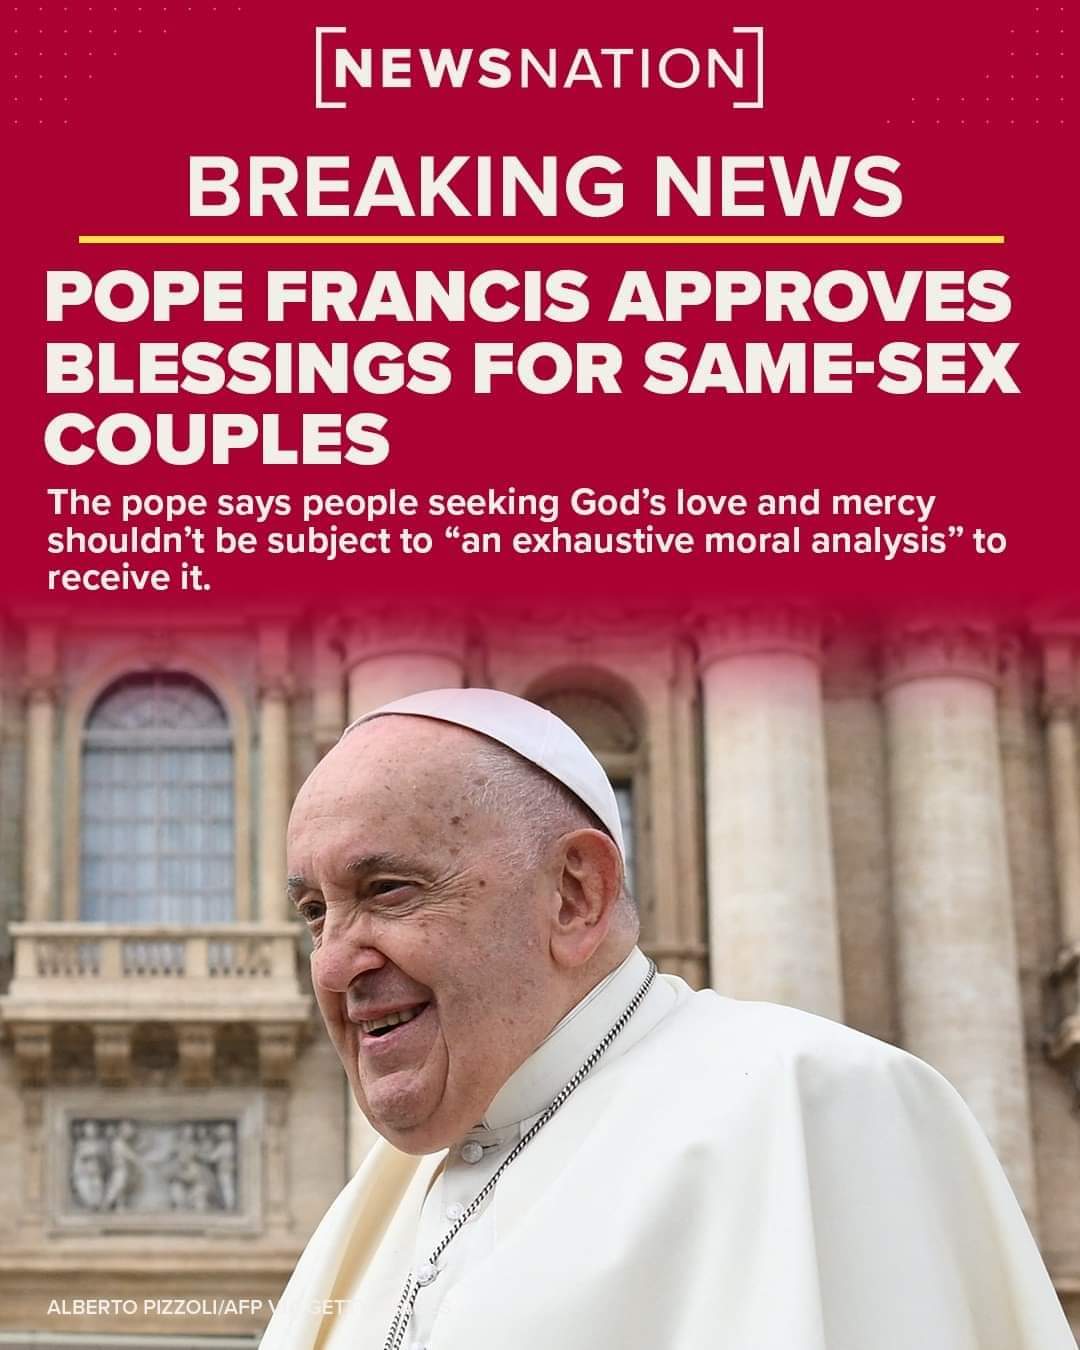 Controversy Trails Pope’s Approval Of Blessings For Same-Sex Couples